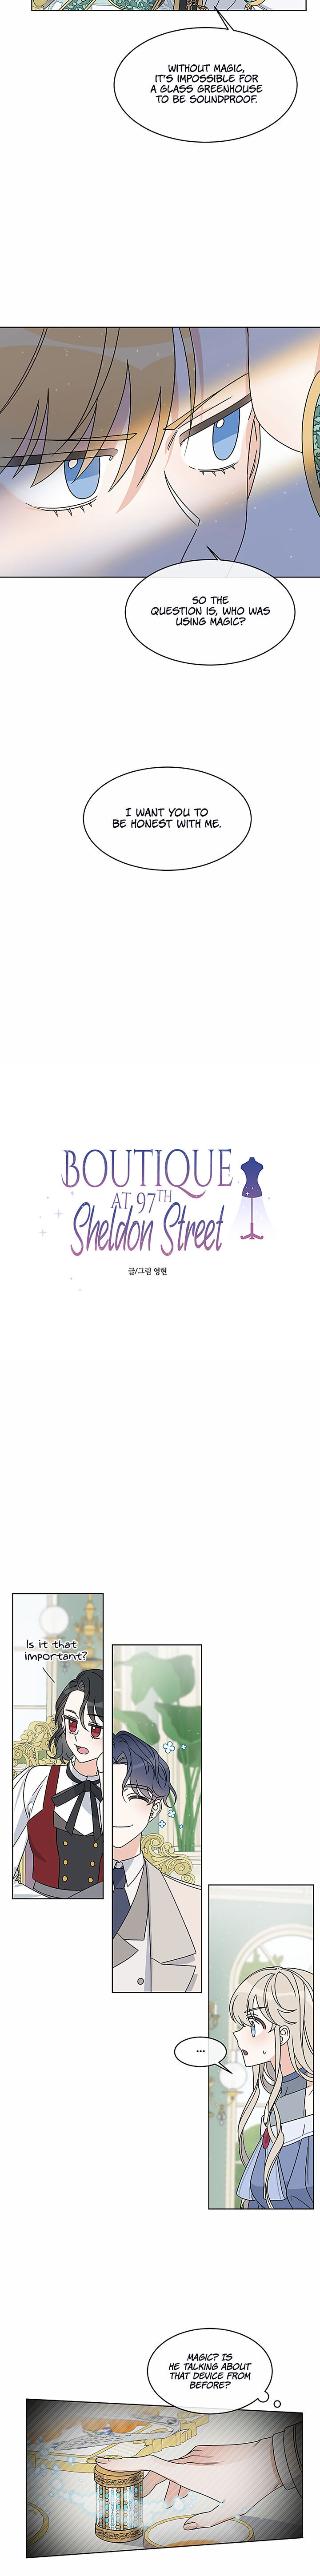 The Boutique At 97Th Sheldon Street - Page 3